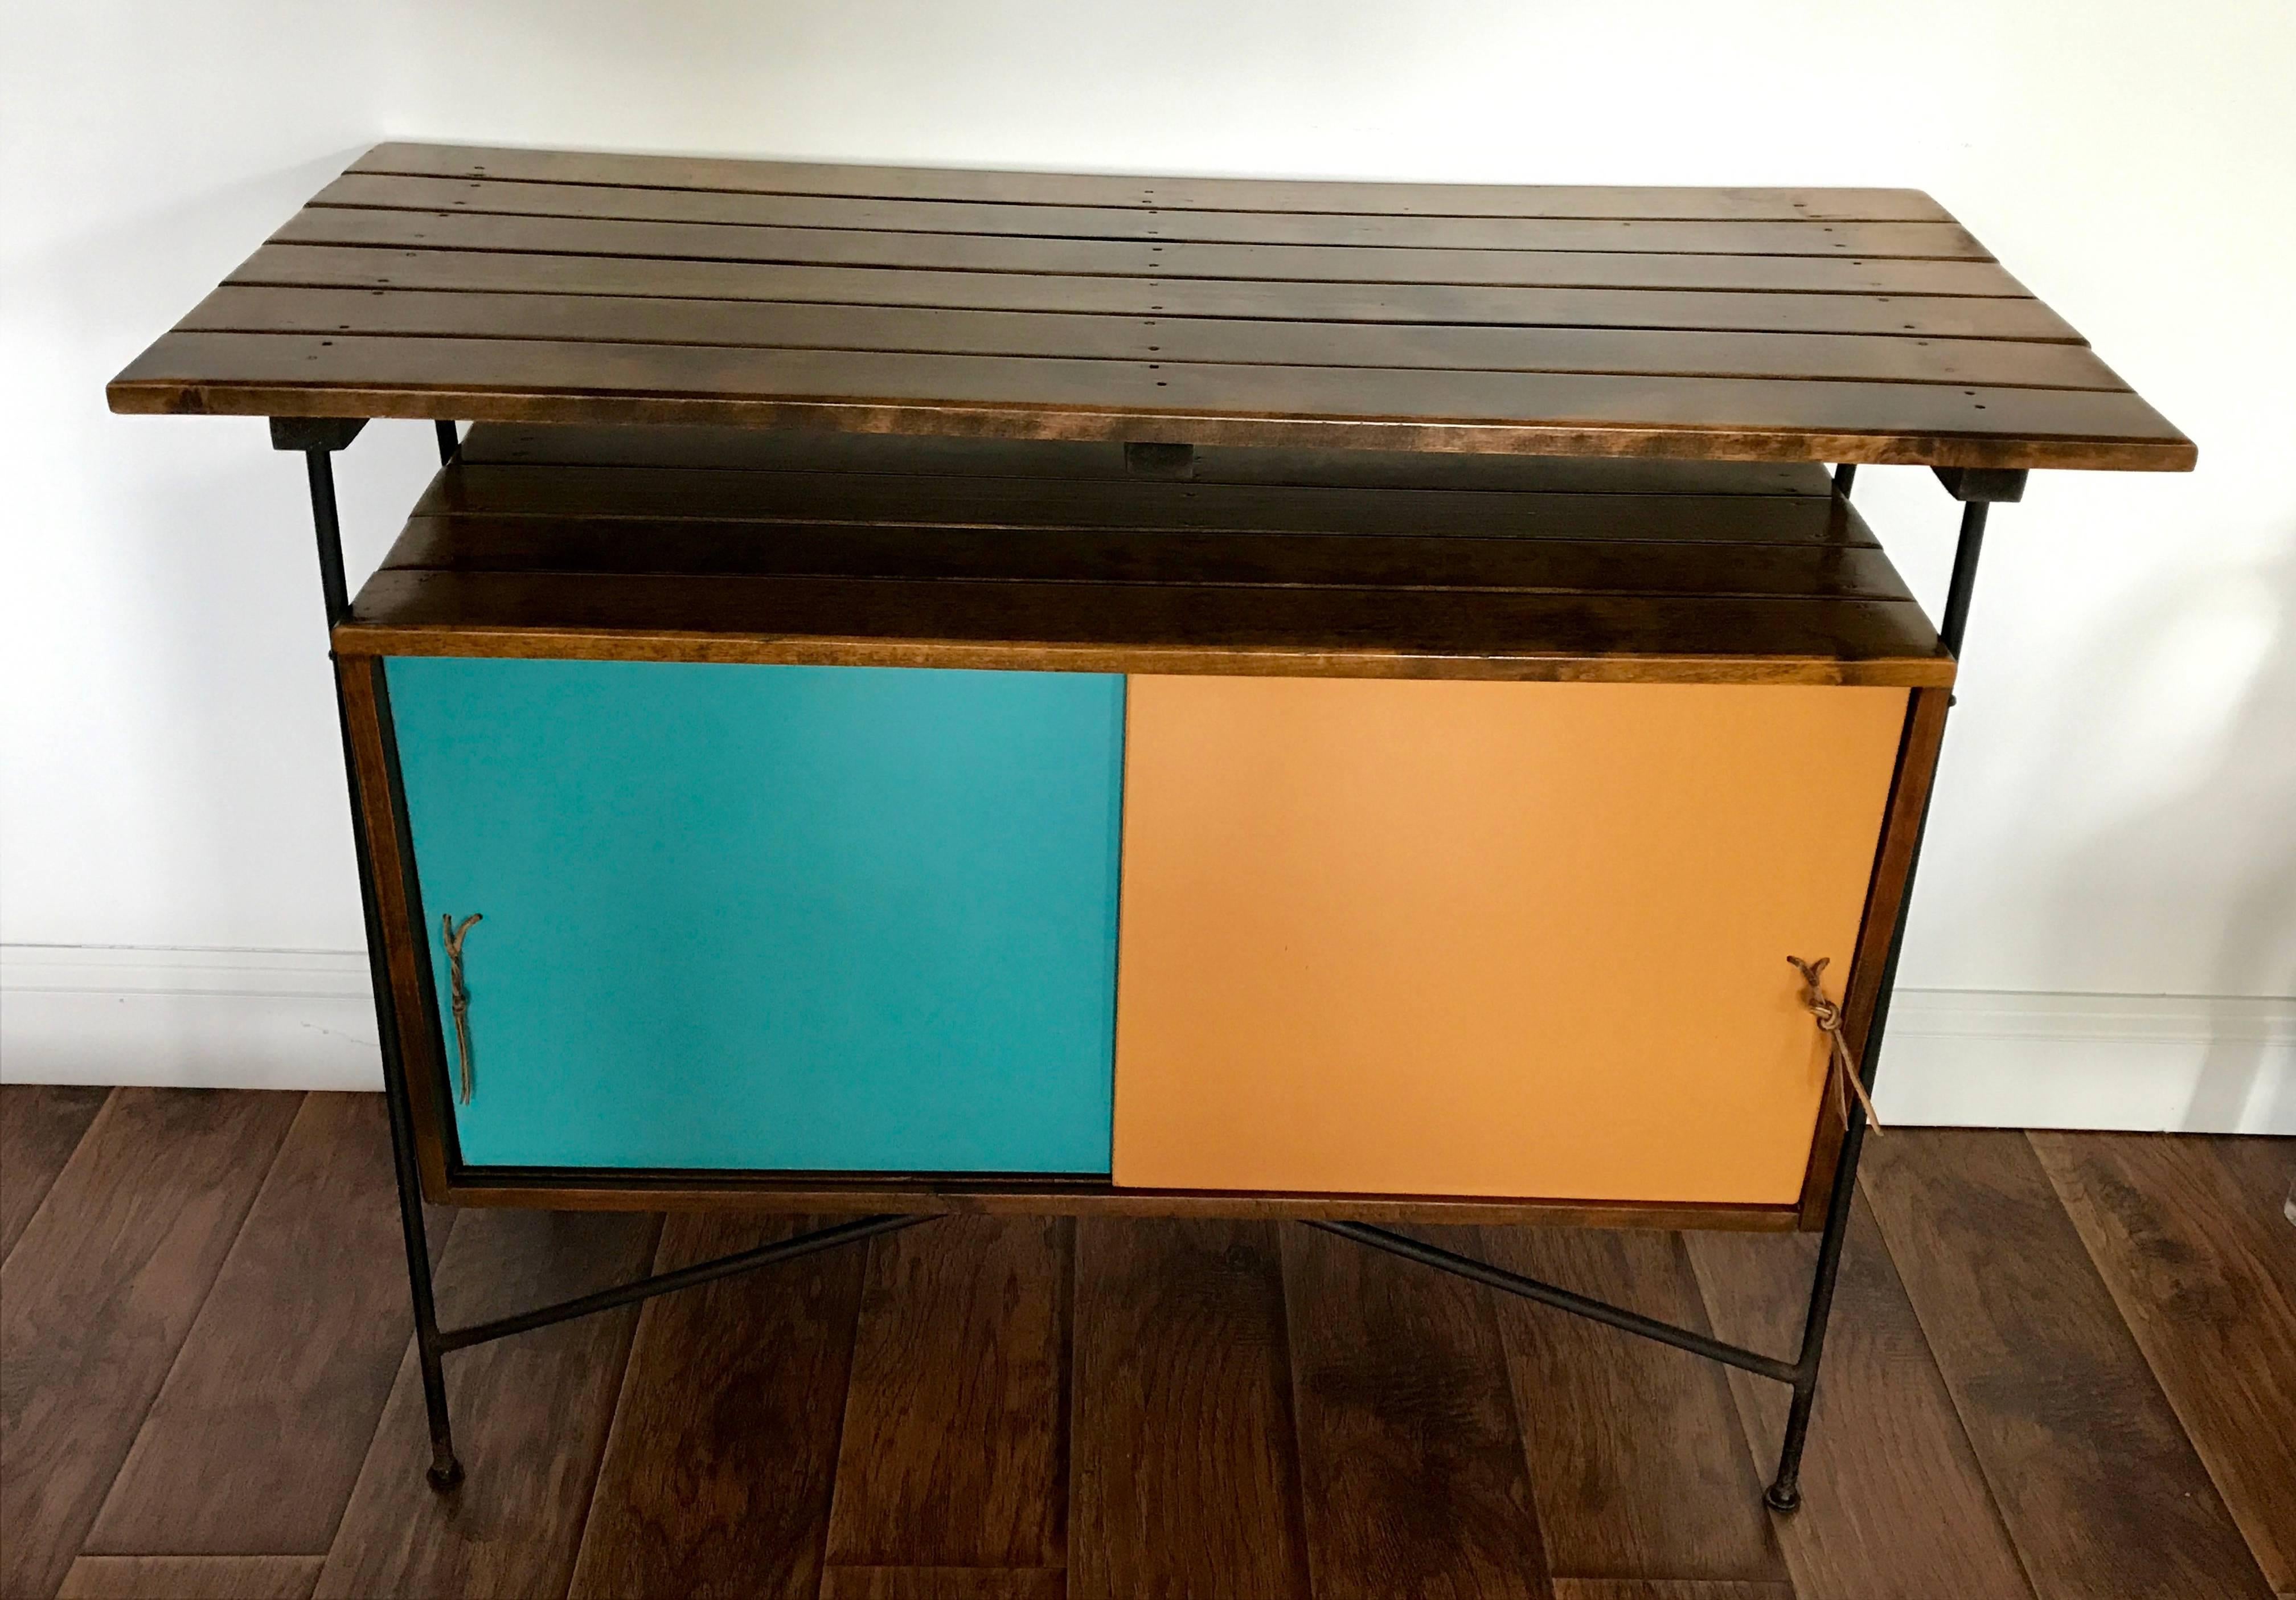 Very cool piece by Arthur Umanoff, can be used as a bar, sideboard, foyer table or server. Umanoff's signature style consisting of slat wood, wrought iron and laminate. Leather pulls for sliding doors. Back is finished in white laminate. All